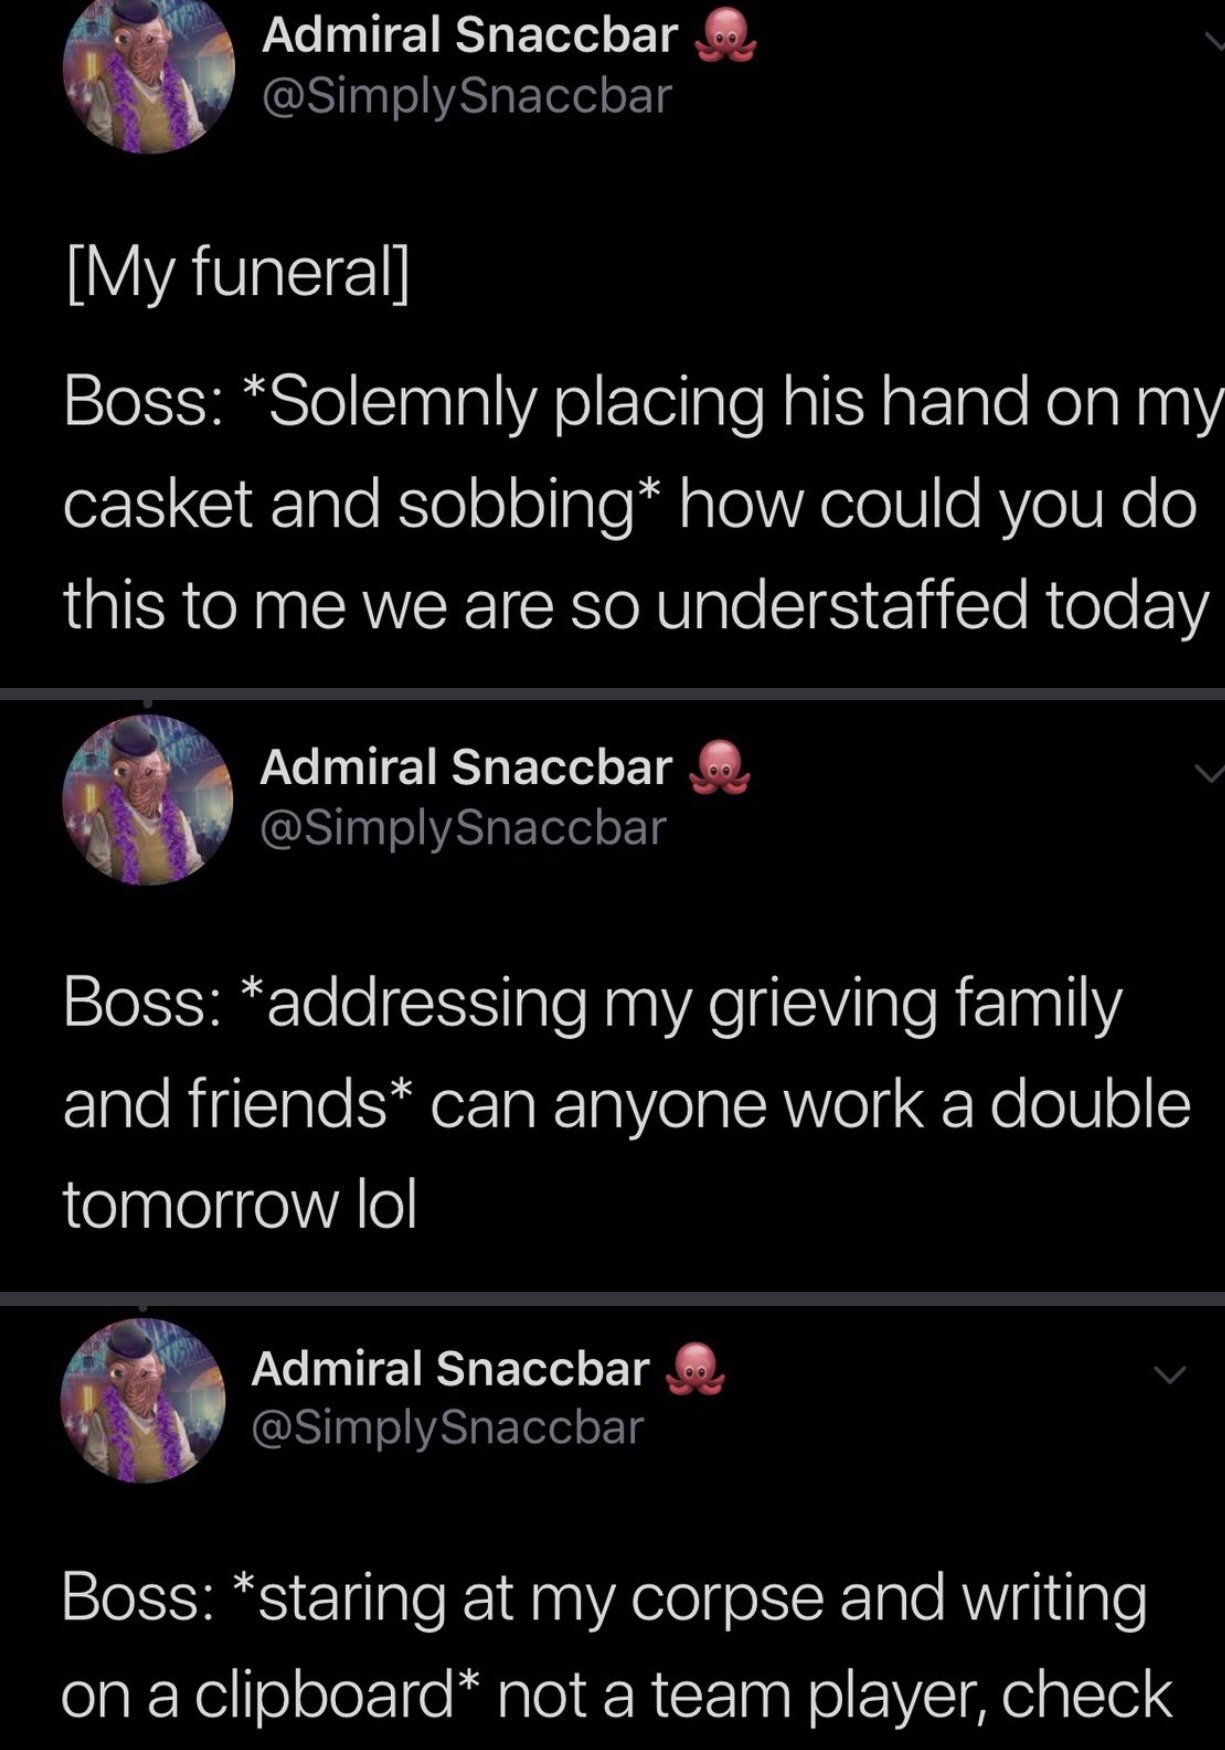 screenshot - Admiral Snaccbar My funeral Boss Solemnly placing his hand on my casket and sobbing how could you do this to me we are so understaffed today Admiral Snaccbar Boss addressing my grieving family and friends can anyone work a double tomorrow lol